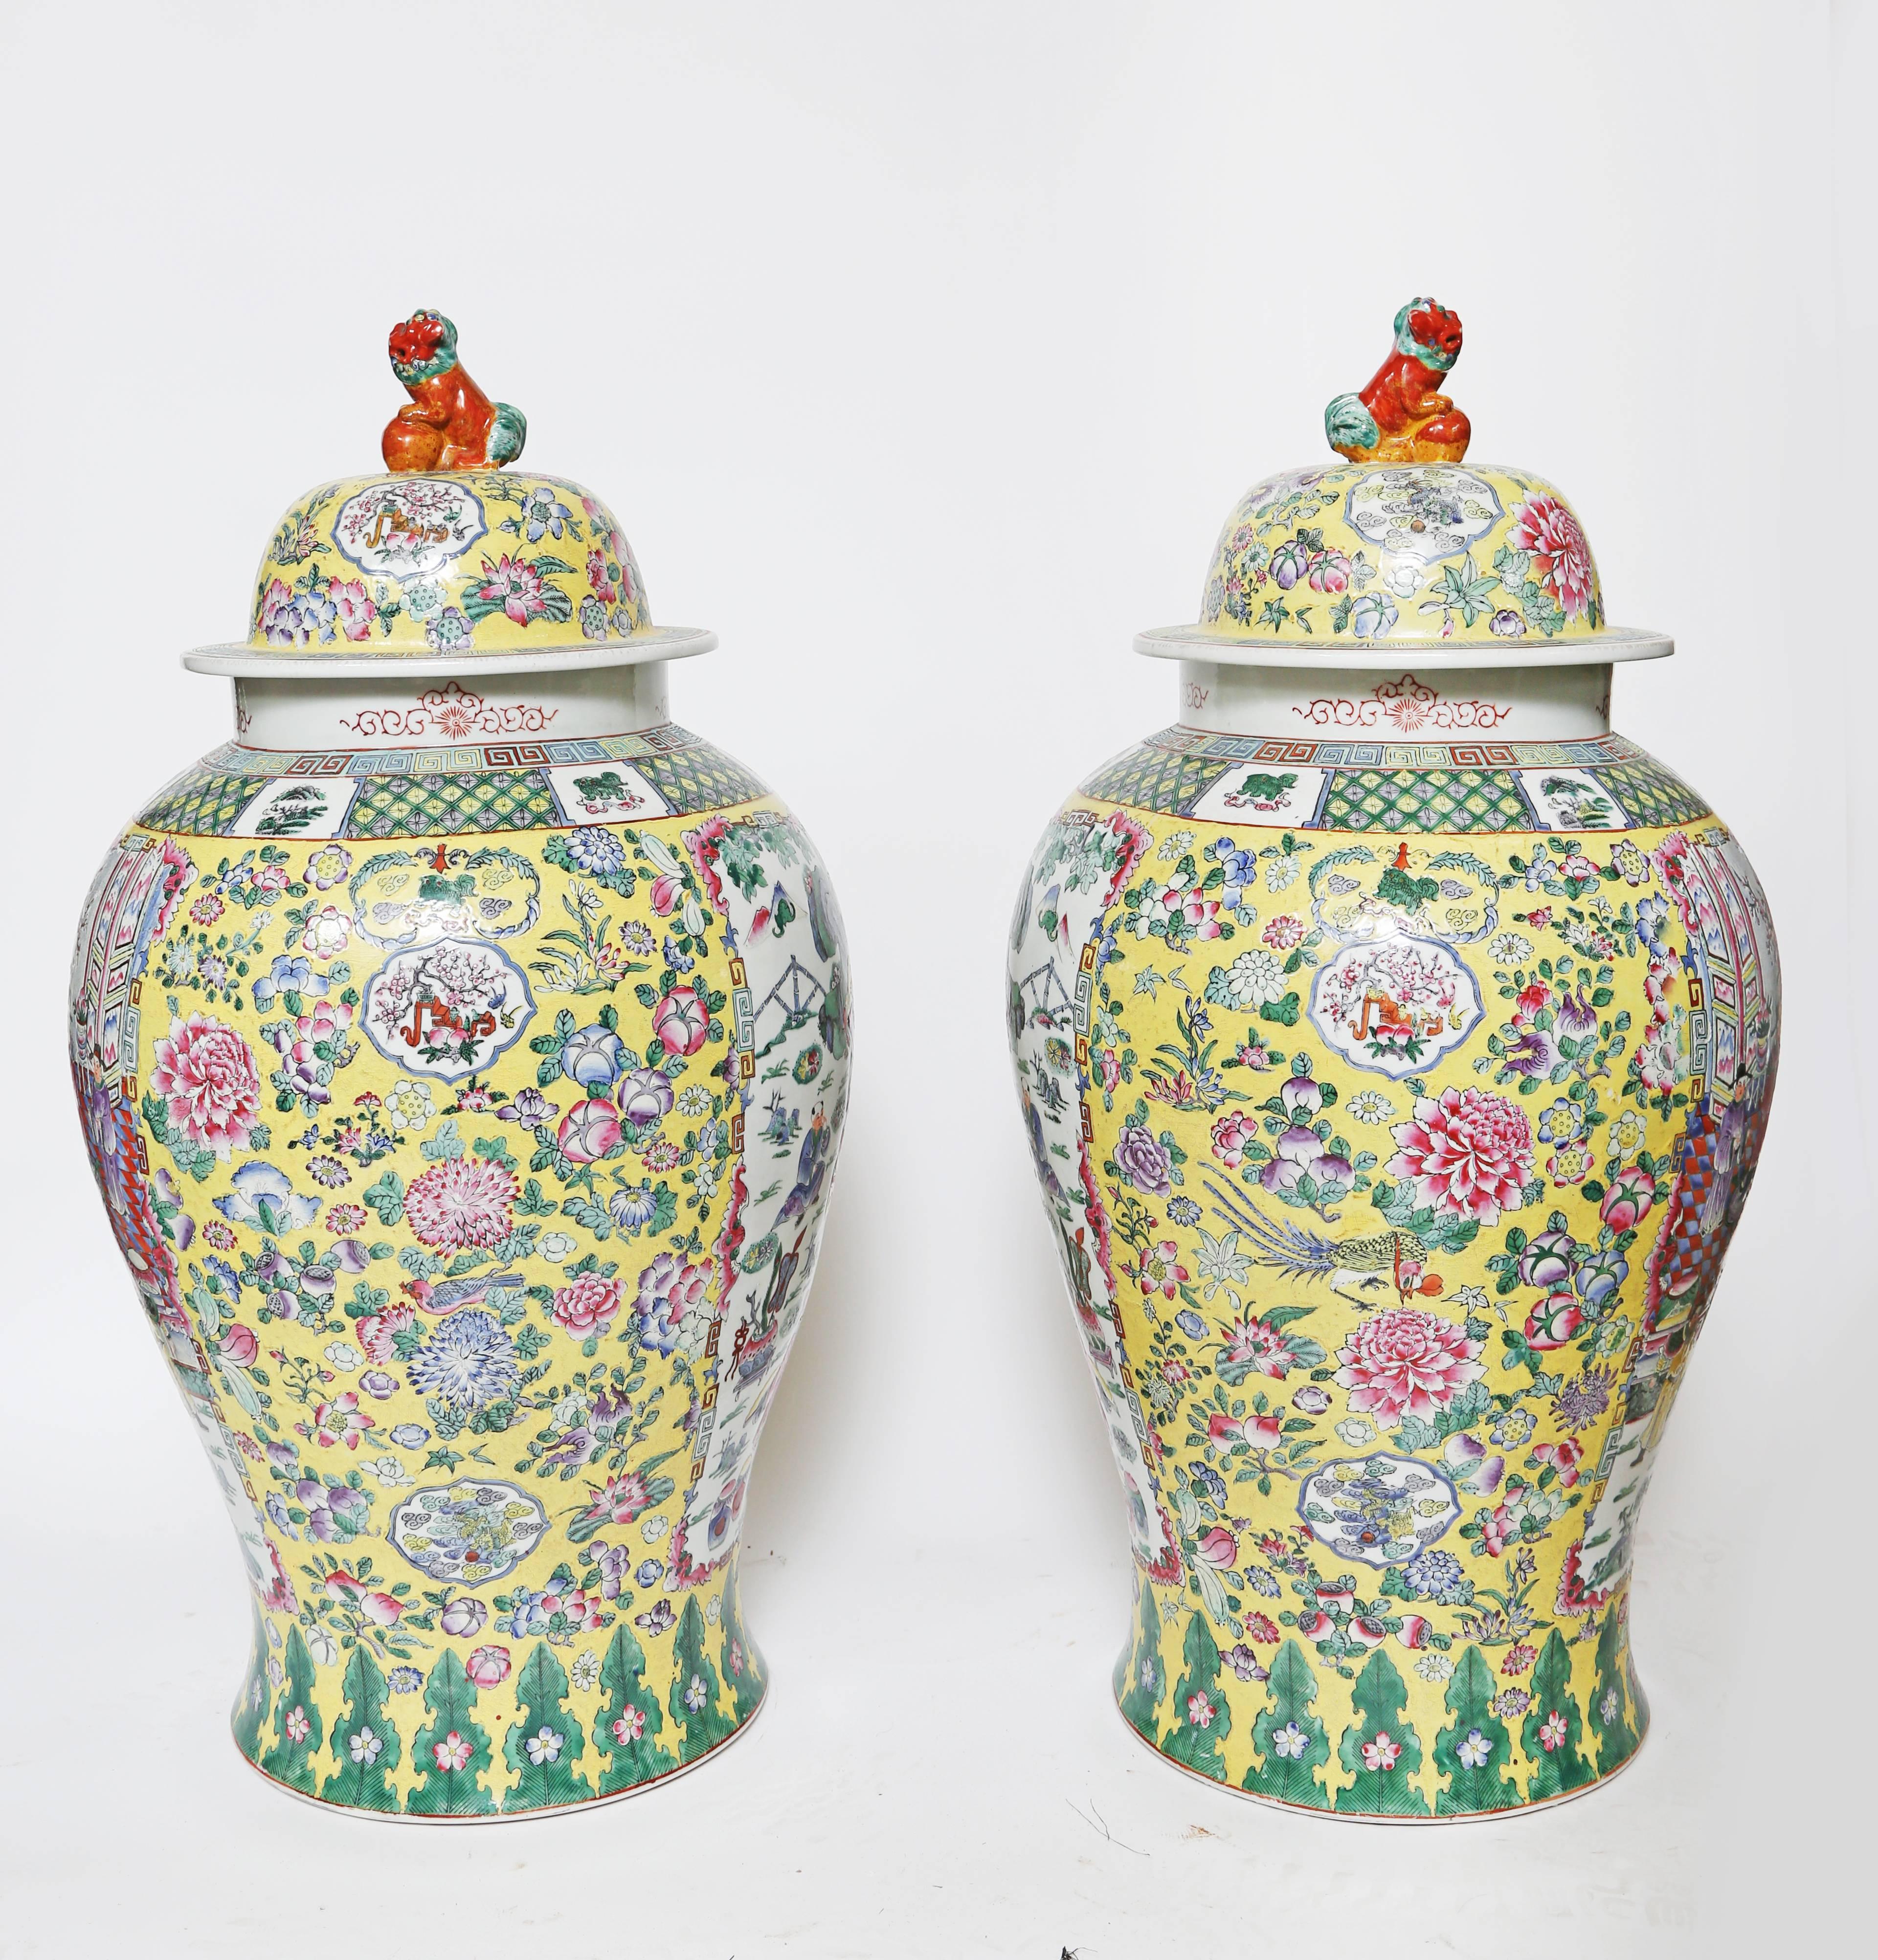  Pair of Chinese Polychromed Porcelain Temple Jars with Covers-30 1/2